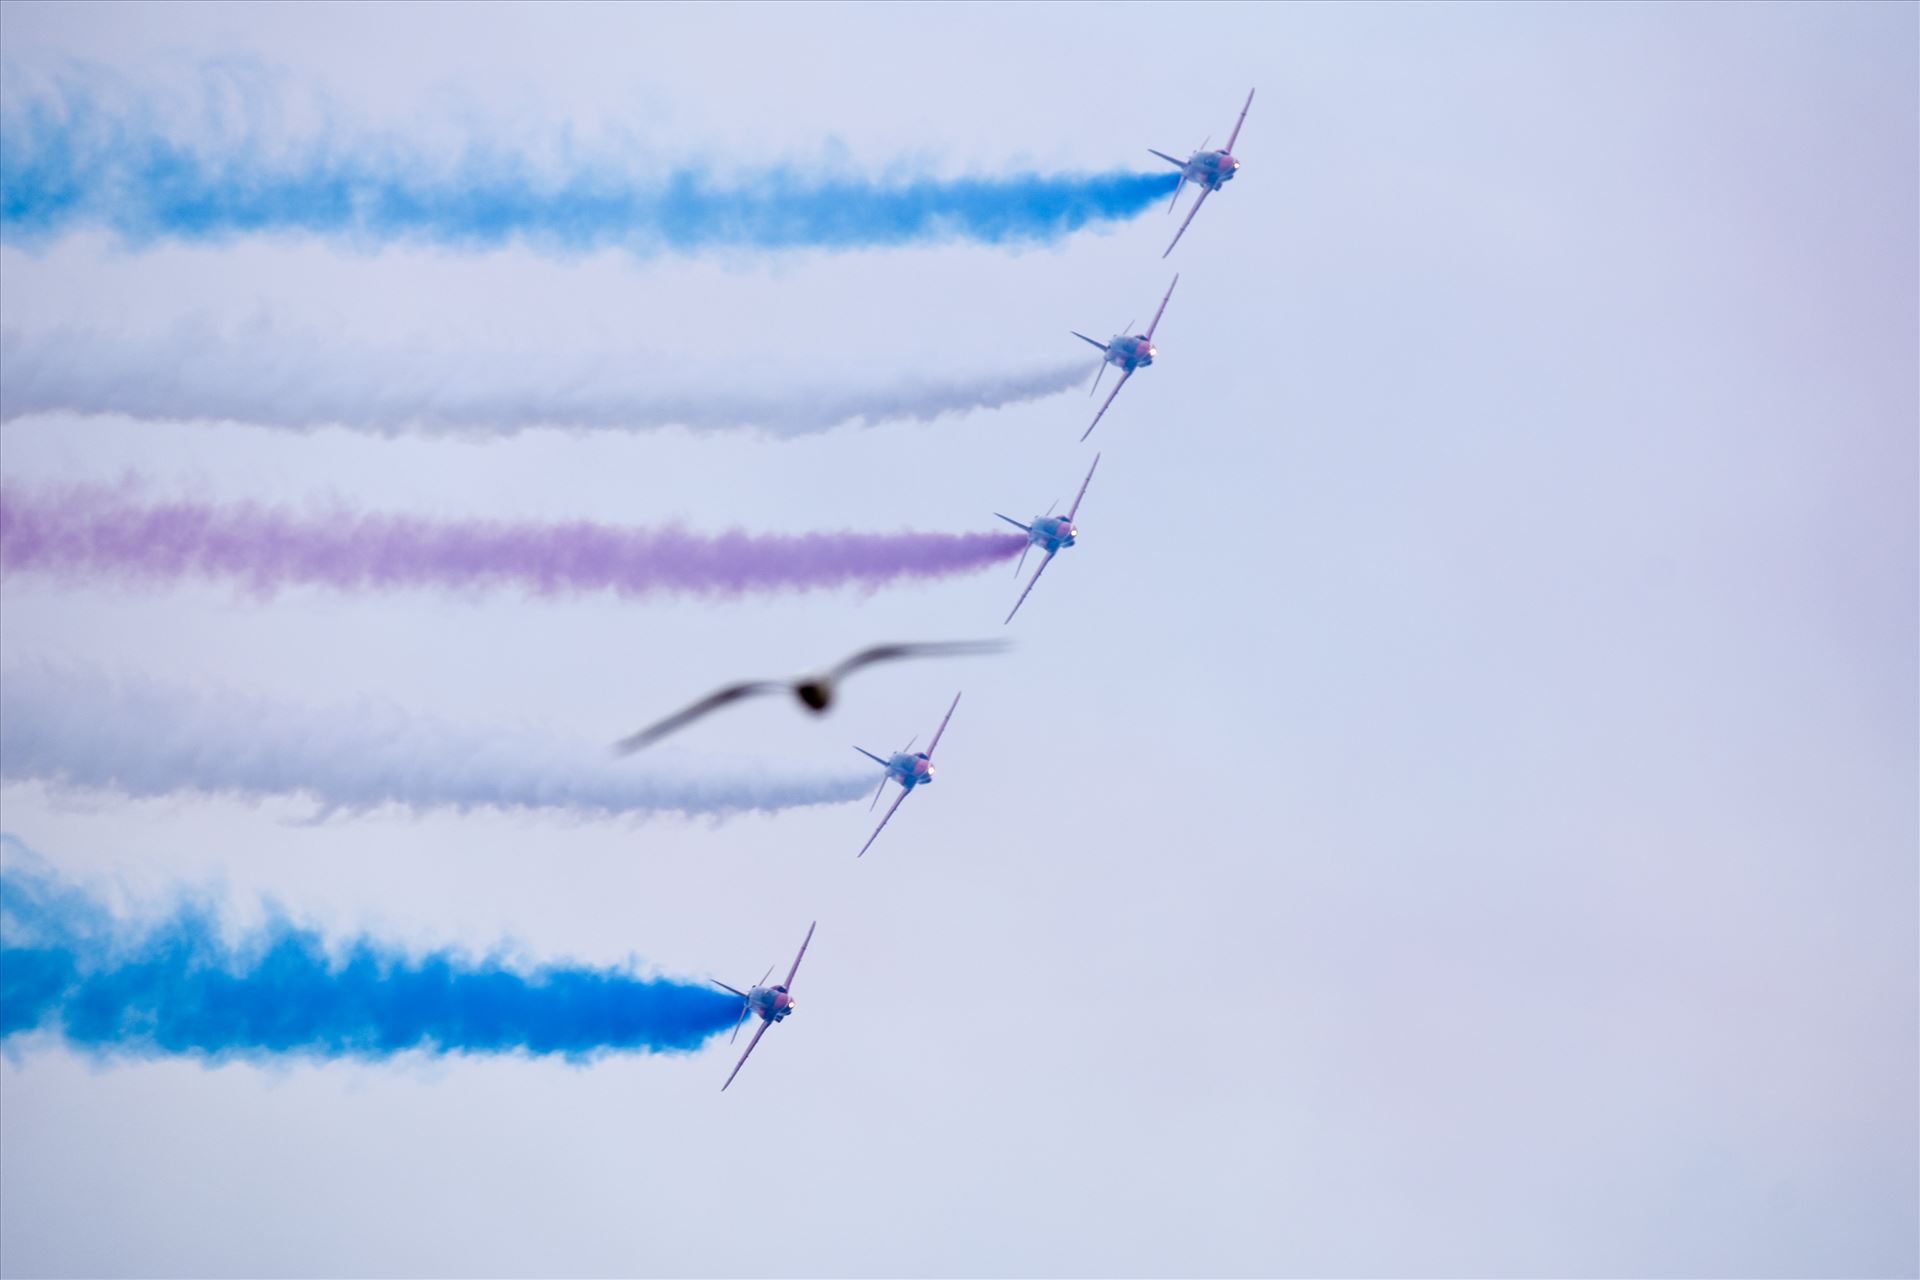 Red Arrows - The Red Arrows taken at the Sunderland air show 2016 by philreay